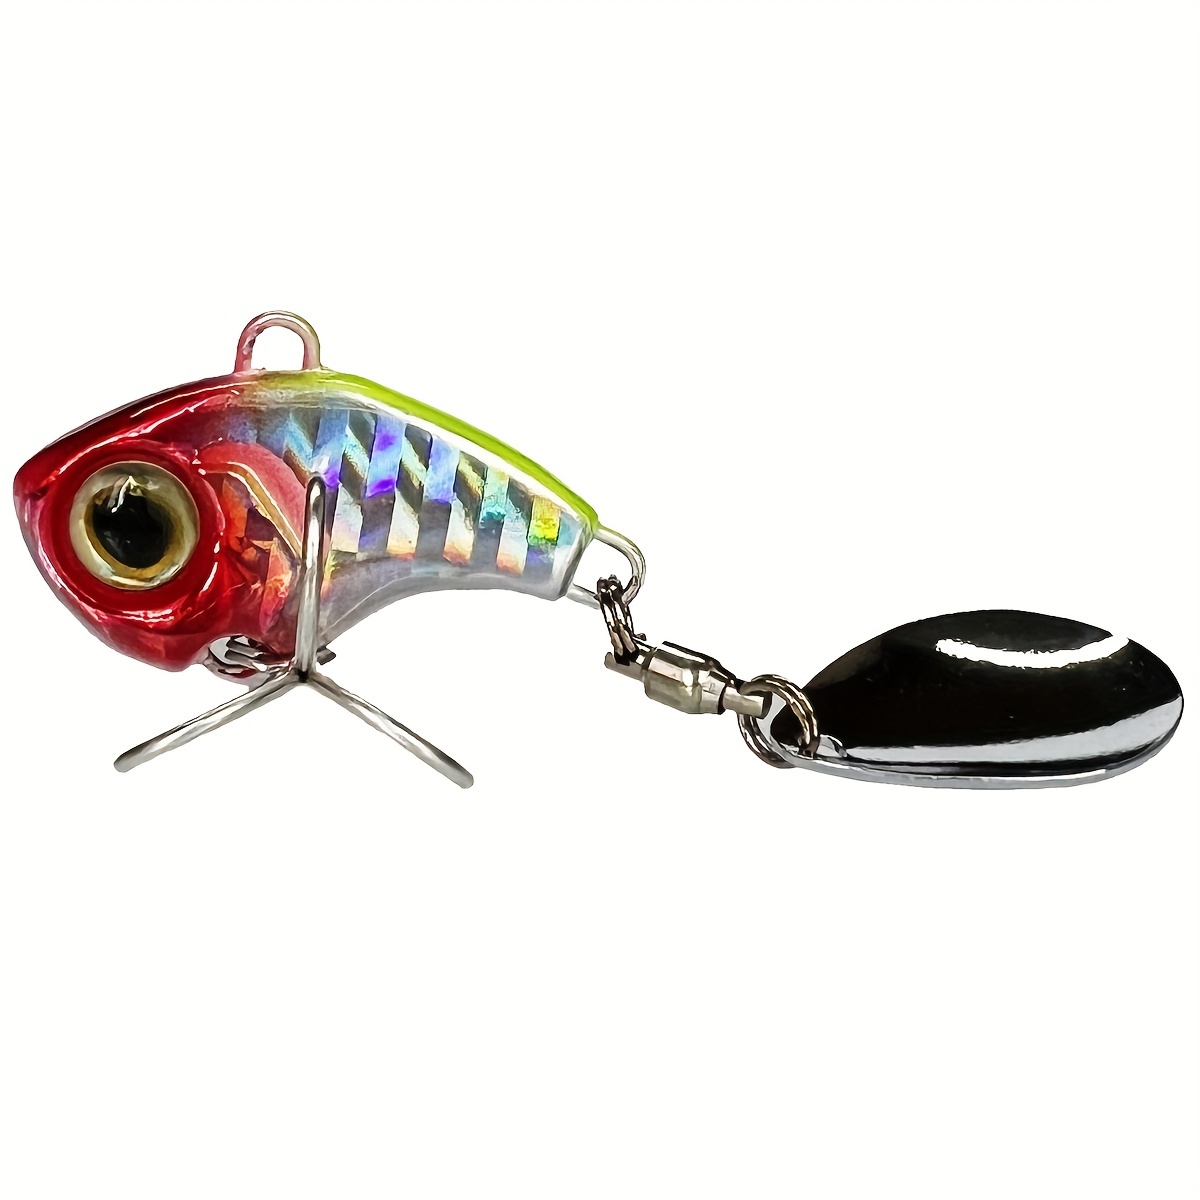 Metal Vib Spinner Bait Fishing Spoons With Sequin Pesca 9g, 13g/17g  Trolling, Rotating Spoon, Wobbler, And Sinking Hard Batch For Bass And Pike  Fishing 230927 From Wai05, $8.54